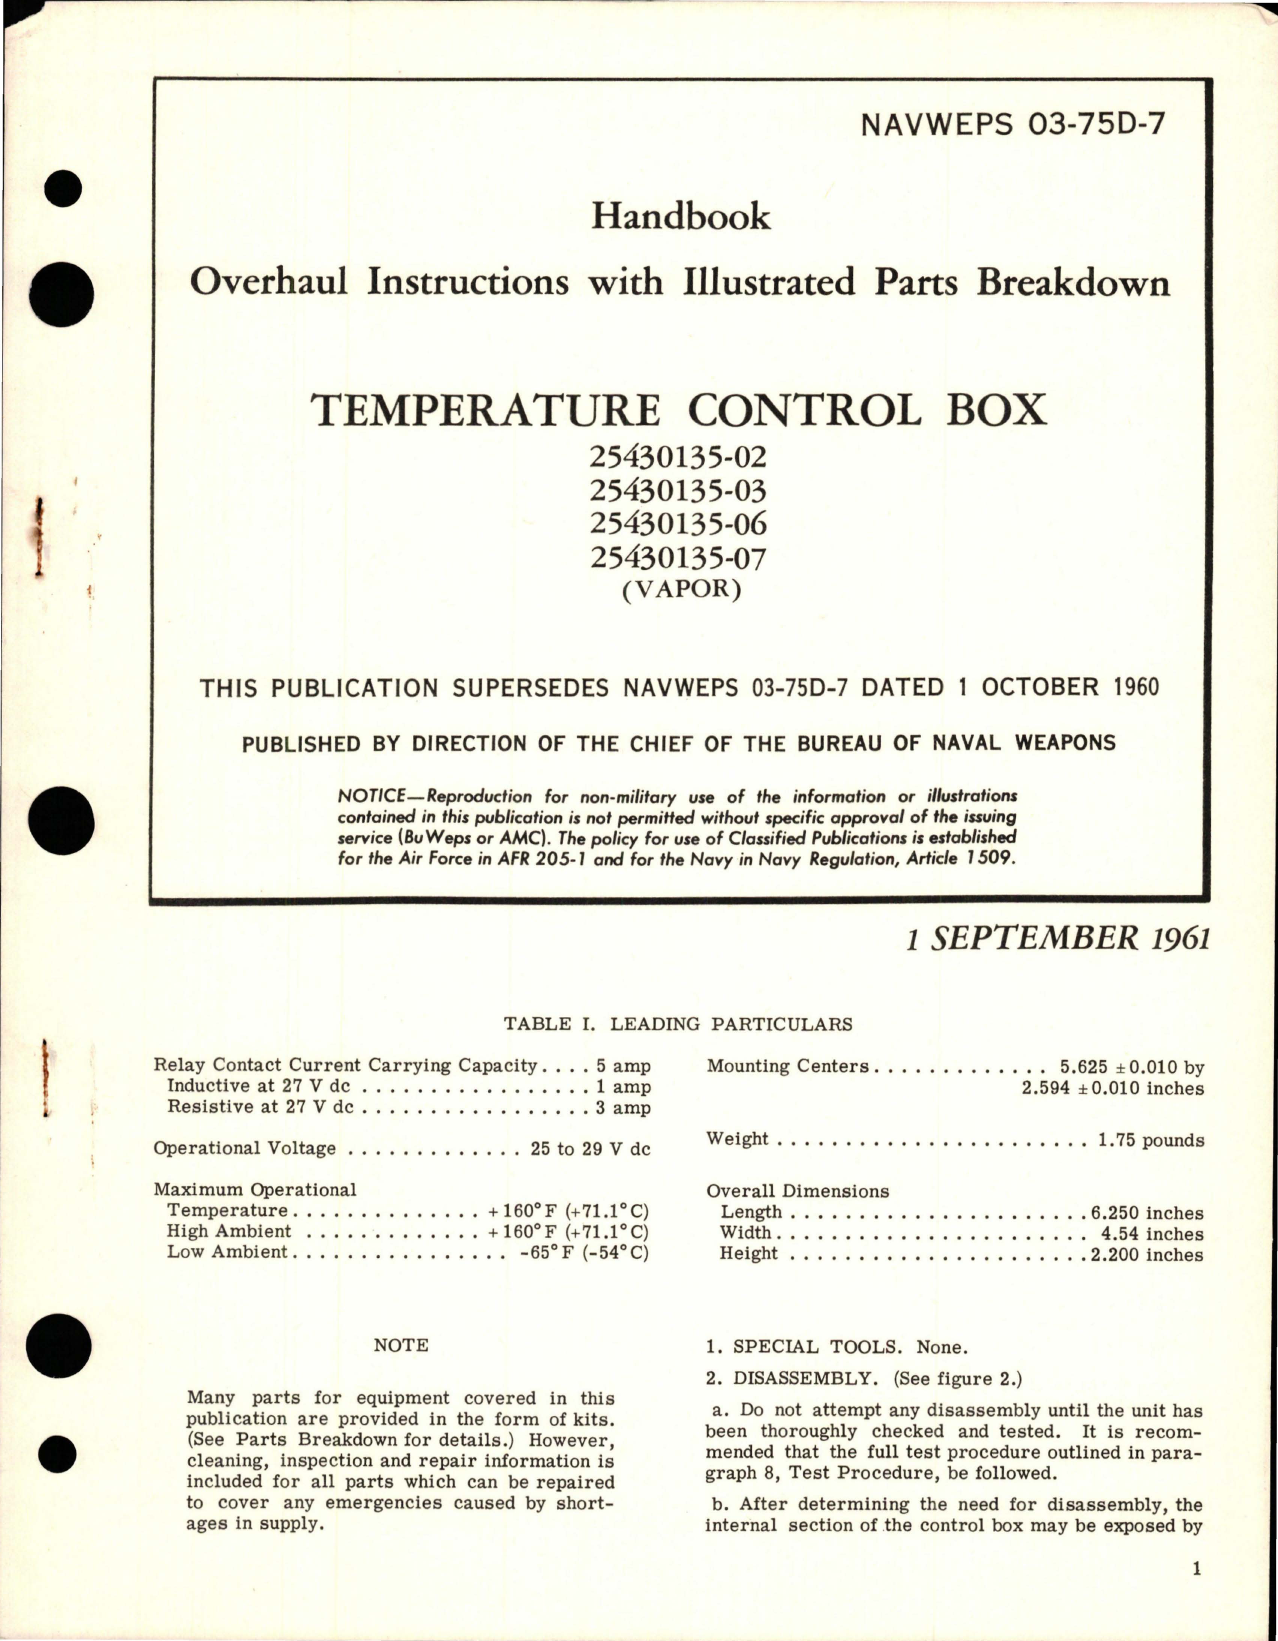 Sample page 1 from AirCorps Library document: Overhaul Instructions with Illustrated Parts Breakdown for Temperature Control Box